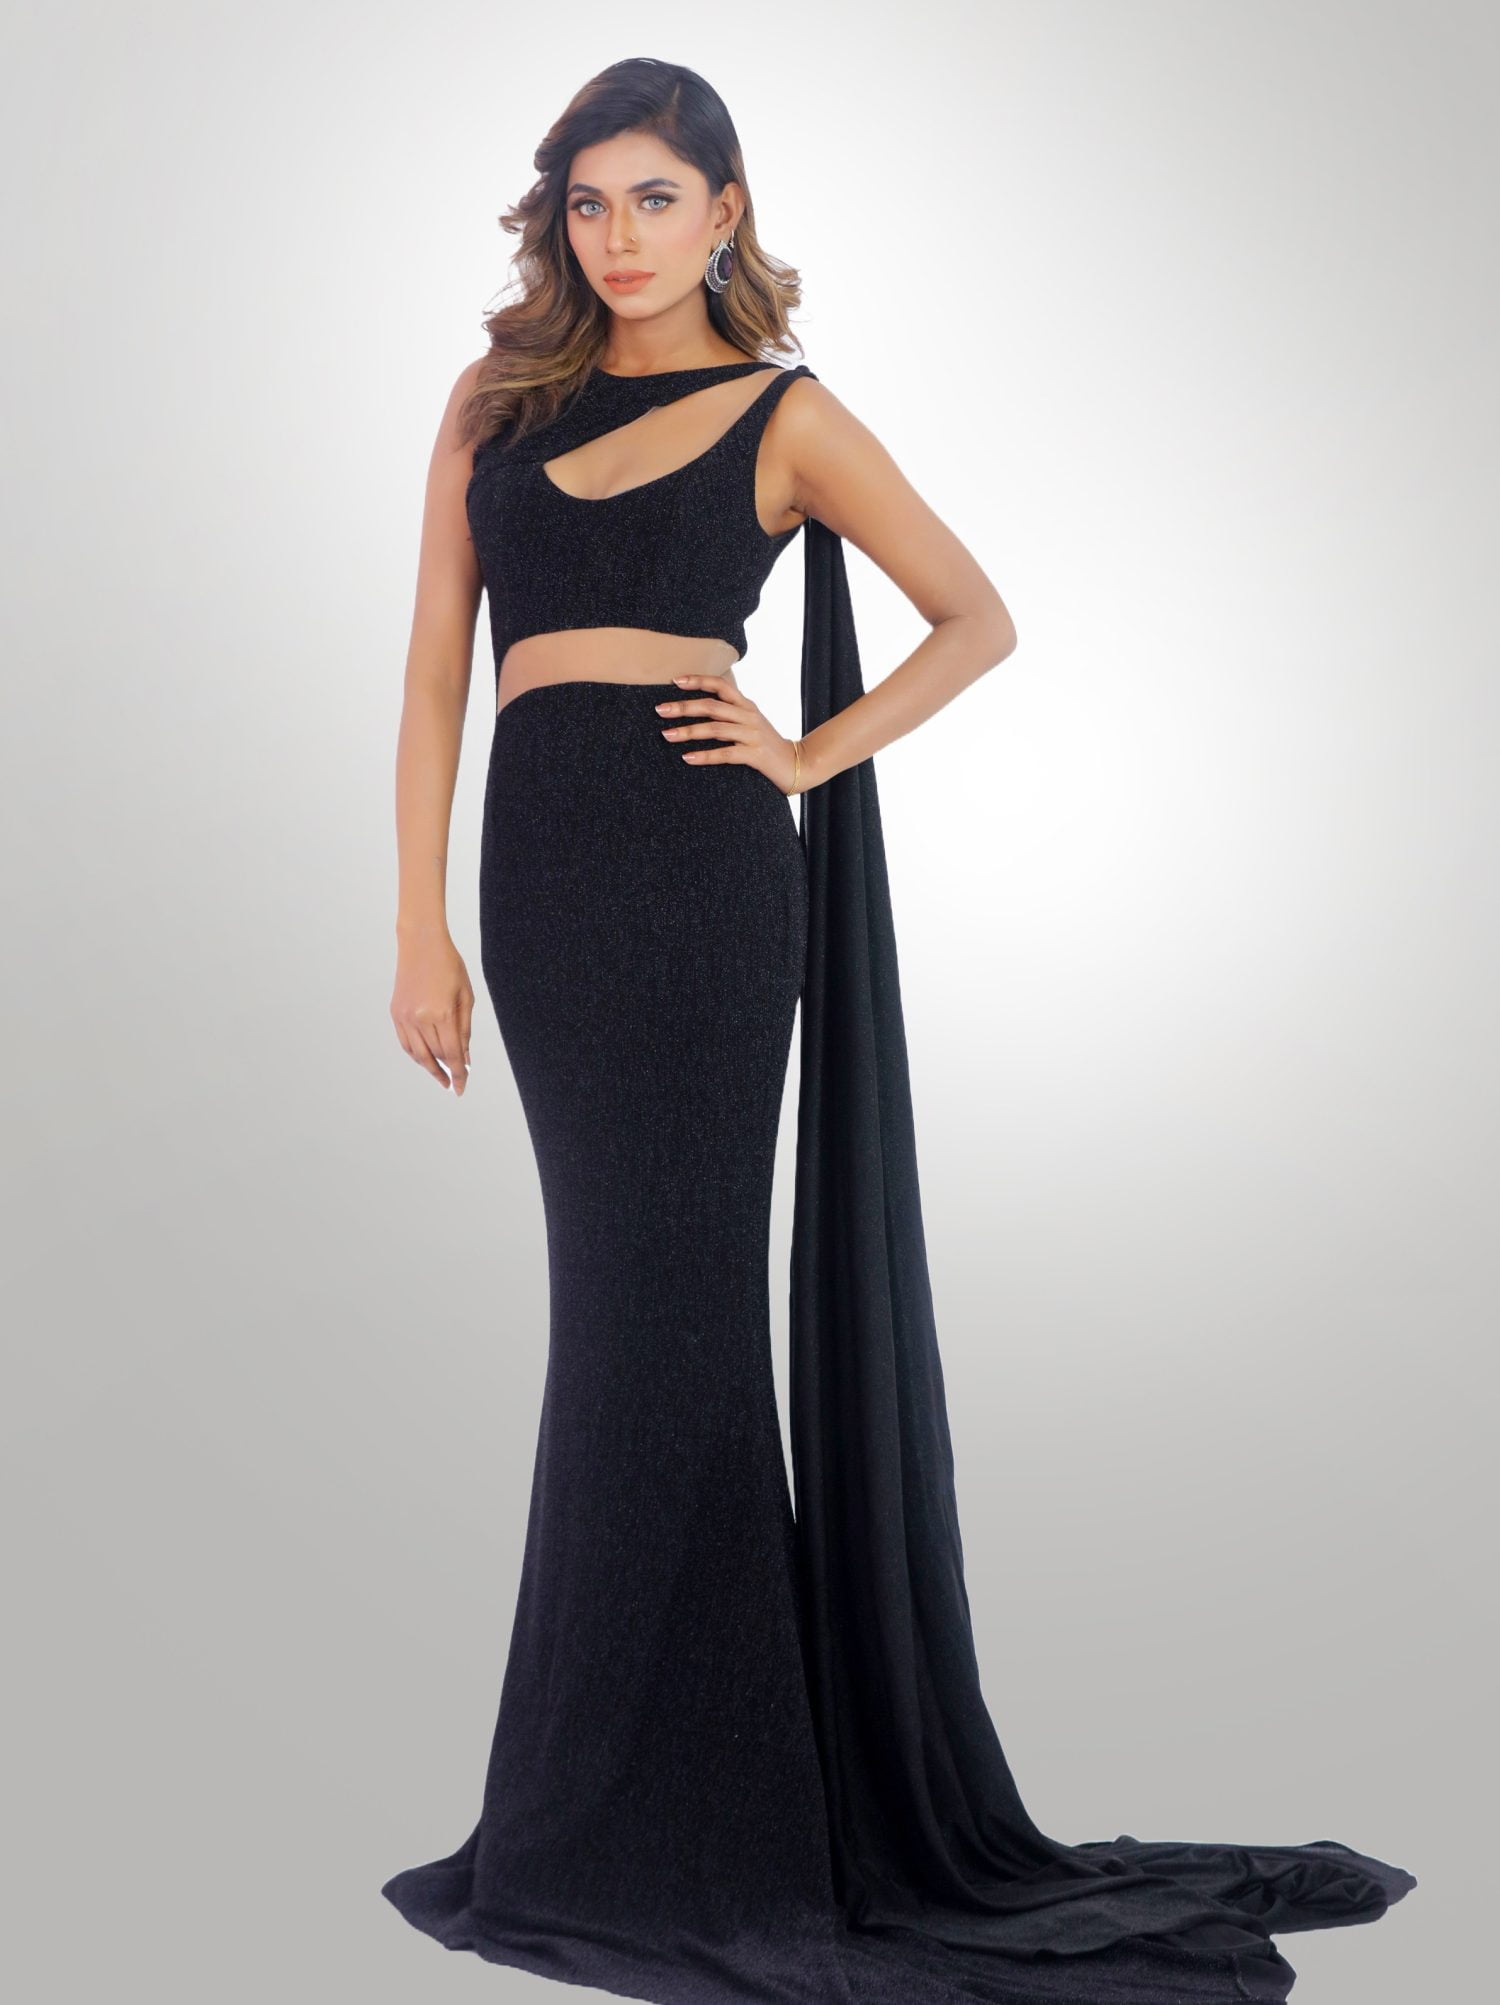 Black Ball Gown Step into the night with the epitome of elegance – our Black Ball Gown. Crafted with precision and passion, this gown is not just a piece of clothing; it’s the armor of the modern-day queen, ready to conquer the ballroom. Floor-Length Skirt with Stretchy Fabric The Floor-Length Skirt cascades gracefully to the ground, a river of fabric that flows with every step you take. The Stretchy Fabric clings softly, offering comfort without compromising on style, ensuring you’re the epitome of both beauty and ease. Full-Length Gown with Hourglass Silhouette Our Full-Length Gown is a tribute to the timeless hourglass figure. It hugs your curves in a loving embrace, highlighting the small of your waist and blossoming into a full skirt that dances with you through the night. Vogue Essence, Devon Couture by Jannat Akhi Designed by the illustrious Jannat Akhi, this gown is a masterpiece from the Devon Couture collection. Each stitch tells a story of luxury, each fold a verse of sophistication. The Fitted Bodice of our black ball gown is a testament to the art of tailoring. It sculpts your form, creating an Hourglass Silhouette that radiates confidence and allure. The High-Quality Stretchy Fabric promises comfort, allowing you to glide across the dance floor with the grace of a swan. As you make your entrance, the Full, Floor-Length Skirt billows like a cloud around you. With each step, the fabric undulates, revealing its opulent weight and luxurious texture. The Round Neckline is a frame for your visage, drawing eyes to your collarbones and décolletage, while the Black Color is a declaration of sophistication—a canvas upon which your personality shines brightly. This ball gown is more than a dress; it’s a narrative of grandeur and charm. The Small Waistline adds a note of finesse, while the Full Length ensures your presence is felt in every corner of the room. You won’t just turn heads—you’ll stop time.